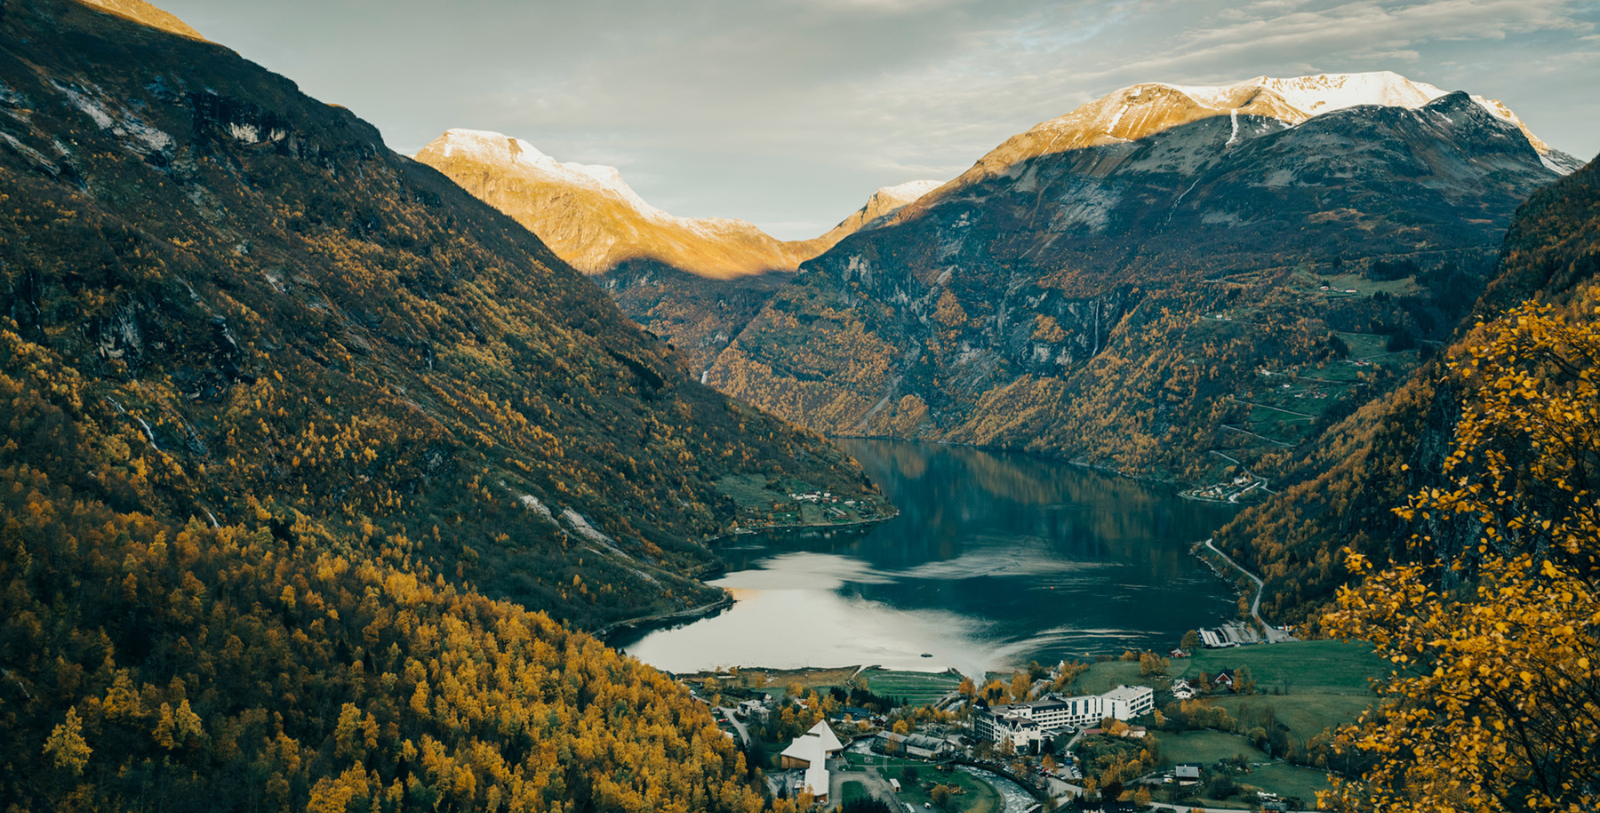 Uncover the wild beauty of the Geirangerfjord, a UNESCO World Heritage Site home to thundering waterfalls and towering cliffsides dotted by deserted fjord farms.